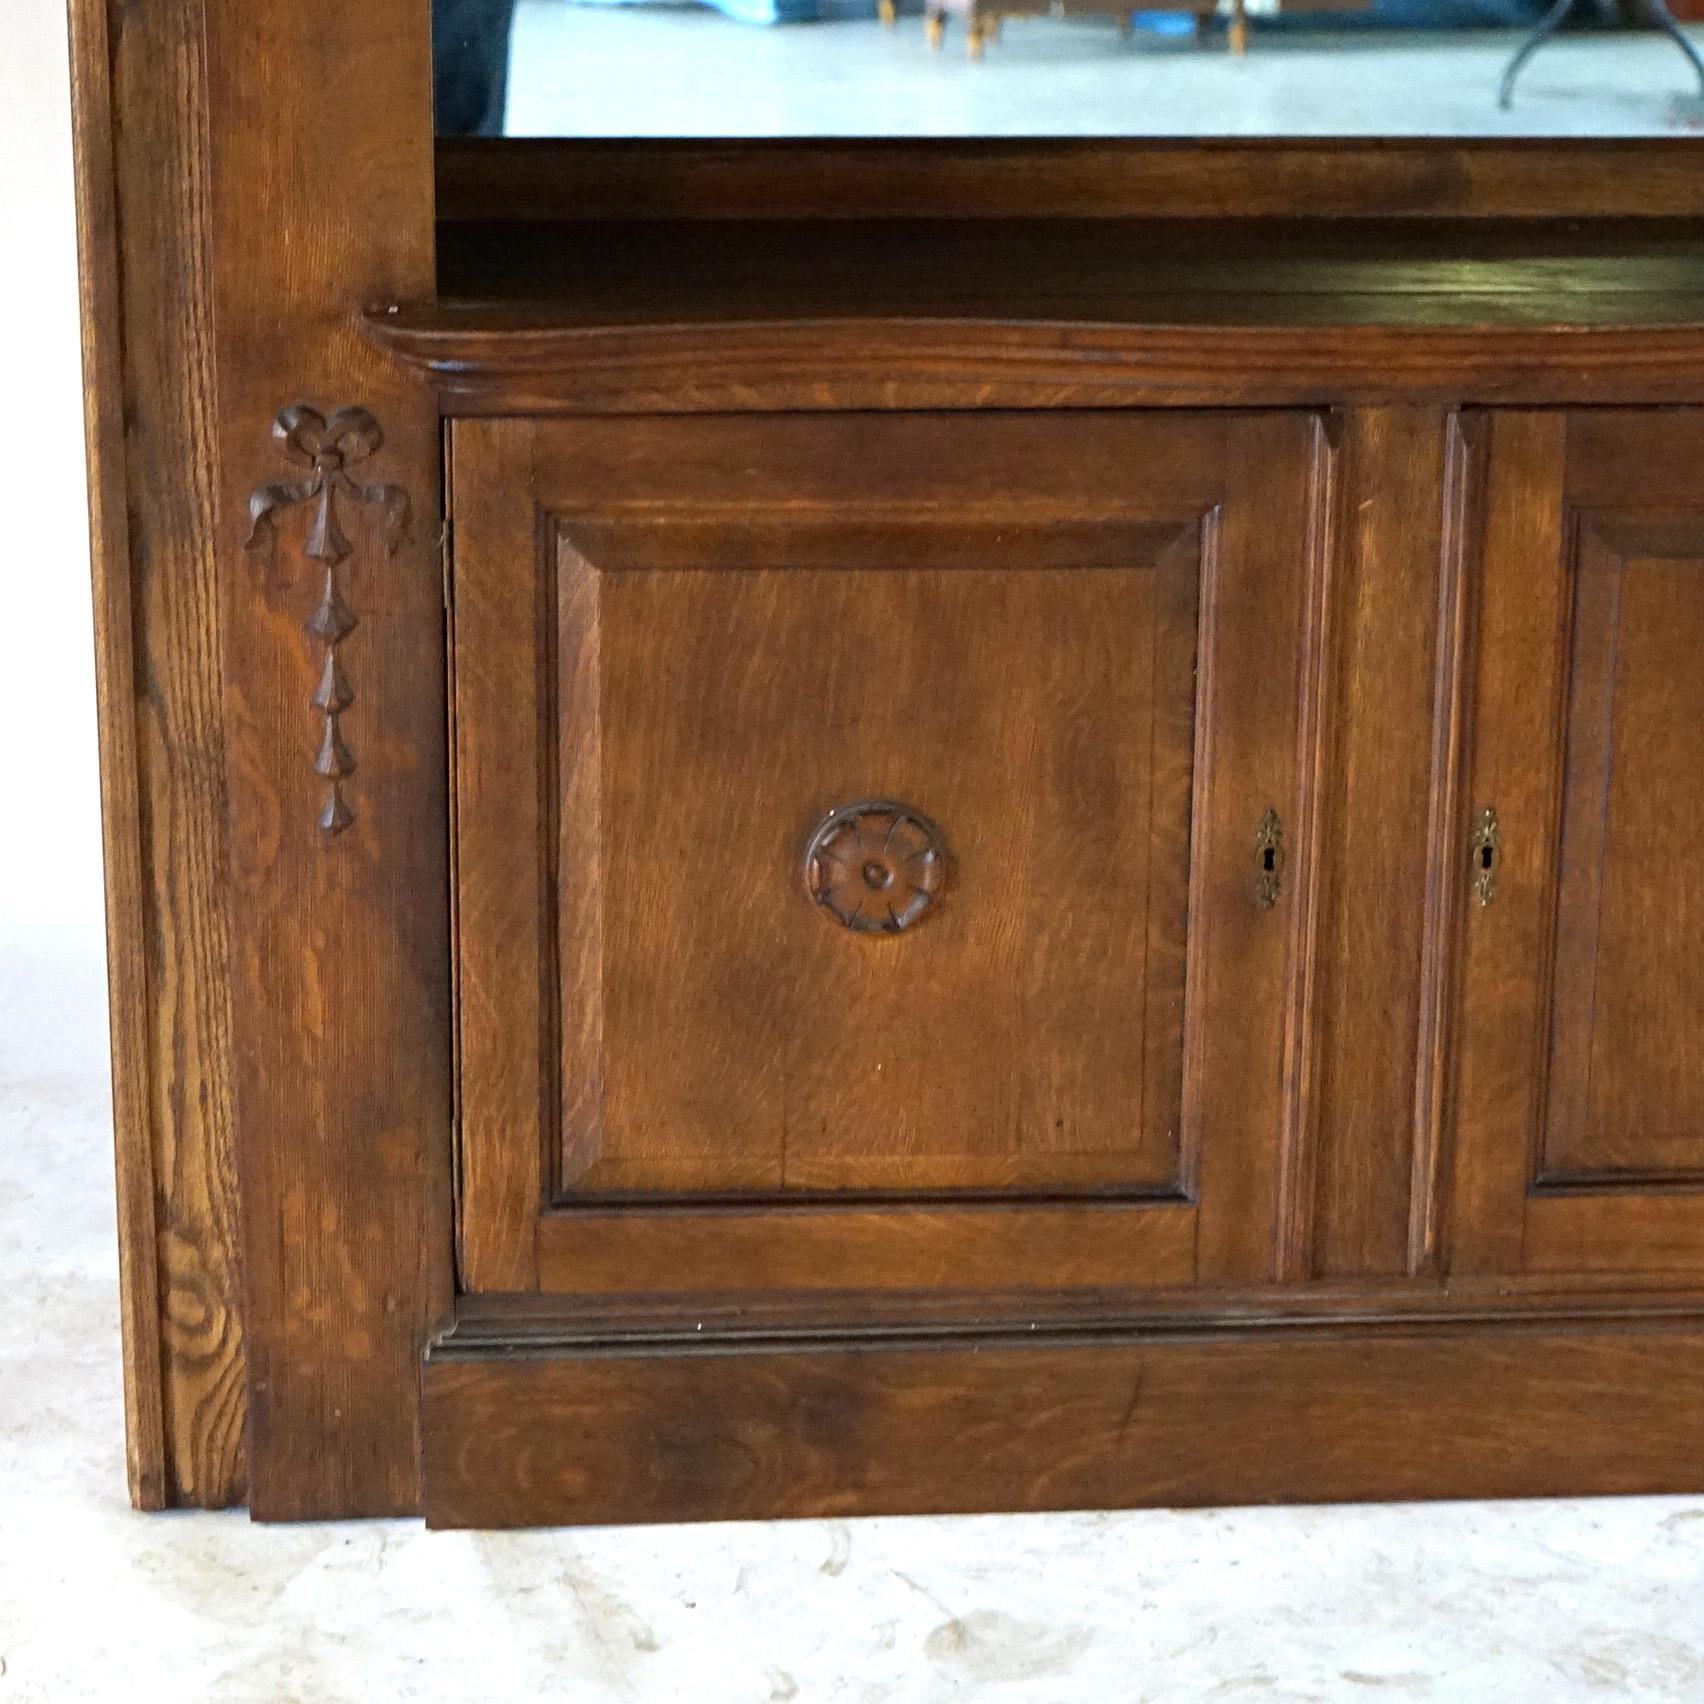 Antique Carved Oak China Buffet Mirrored Sideboard with Leaded Glass Doors c1920 3